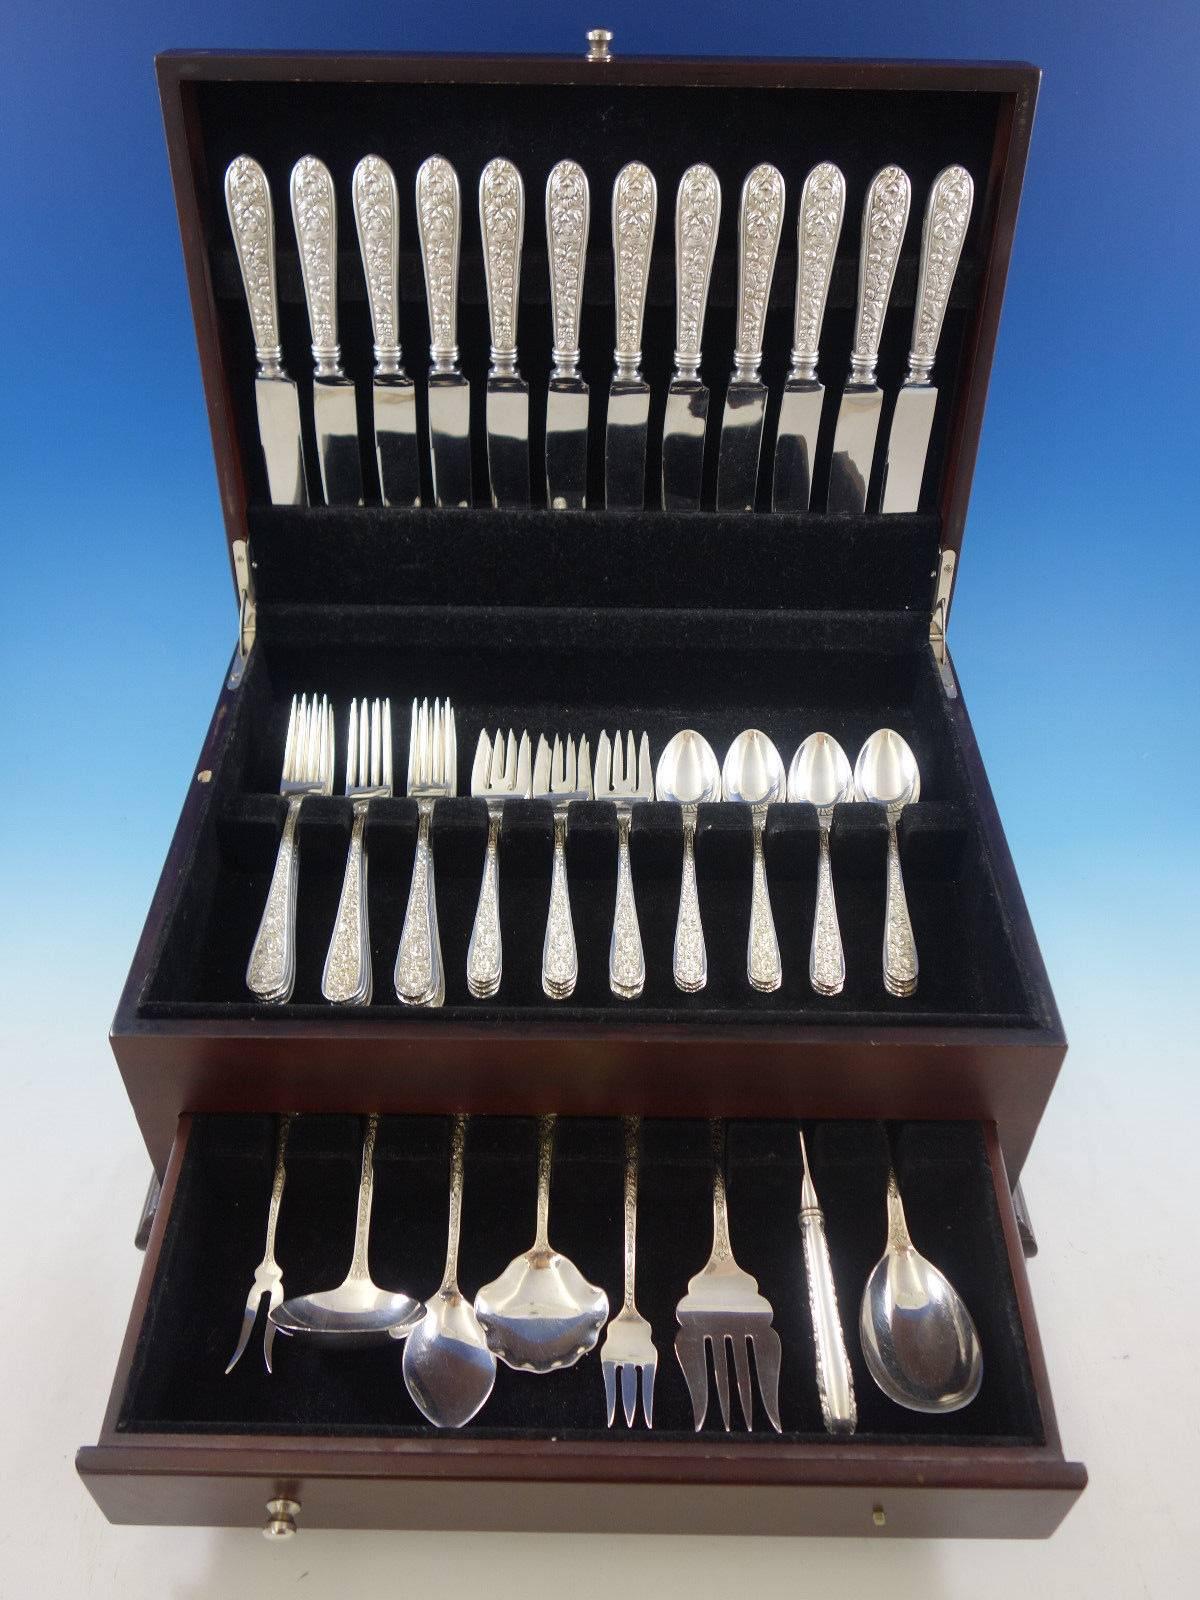 Corsage by Stieff sterling silver flatware set, 57 pieces. This set includes: 

12 knives, 9